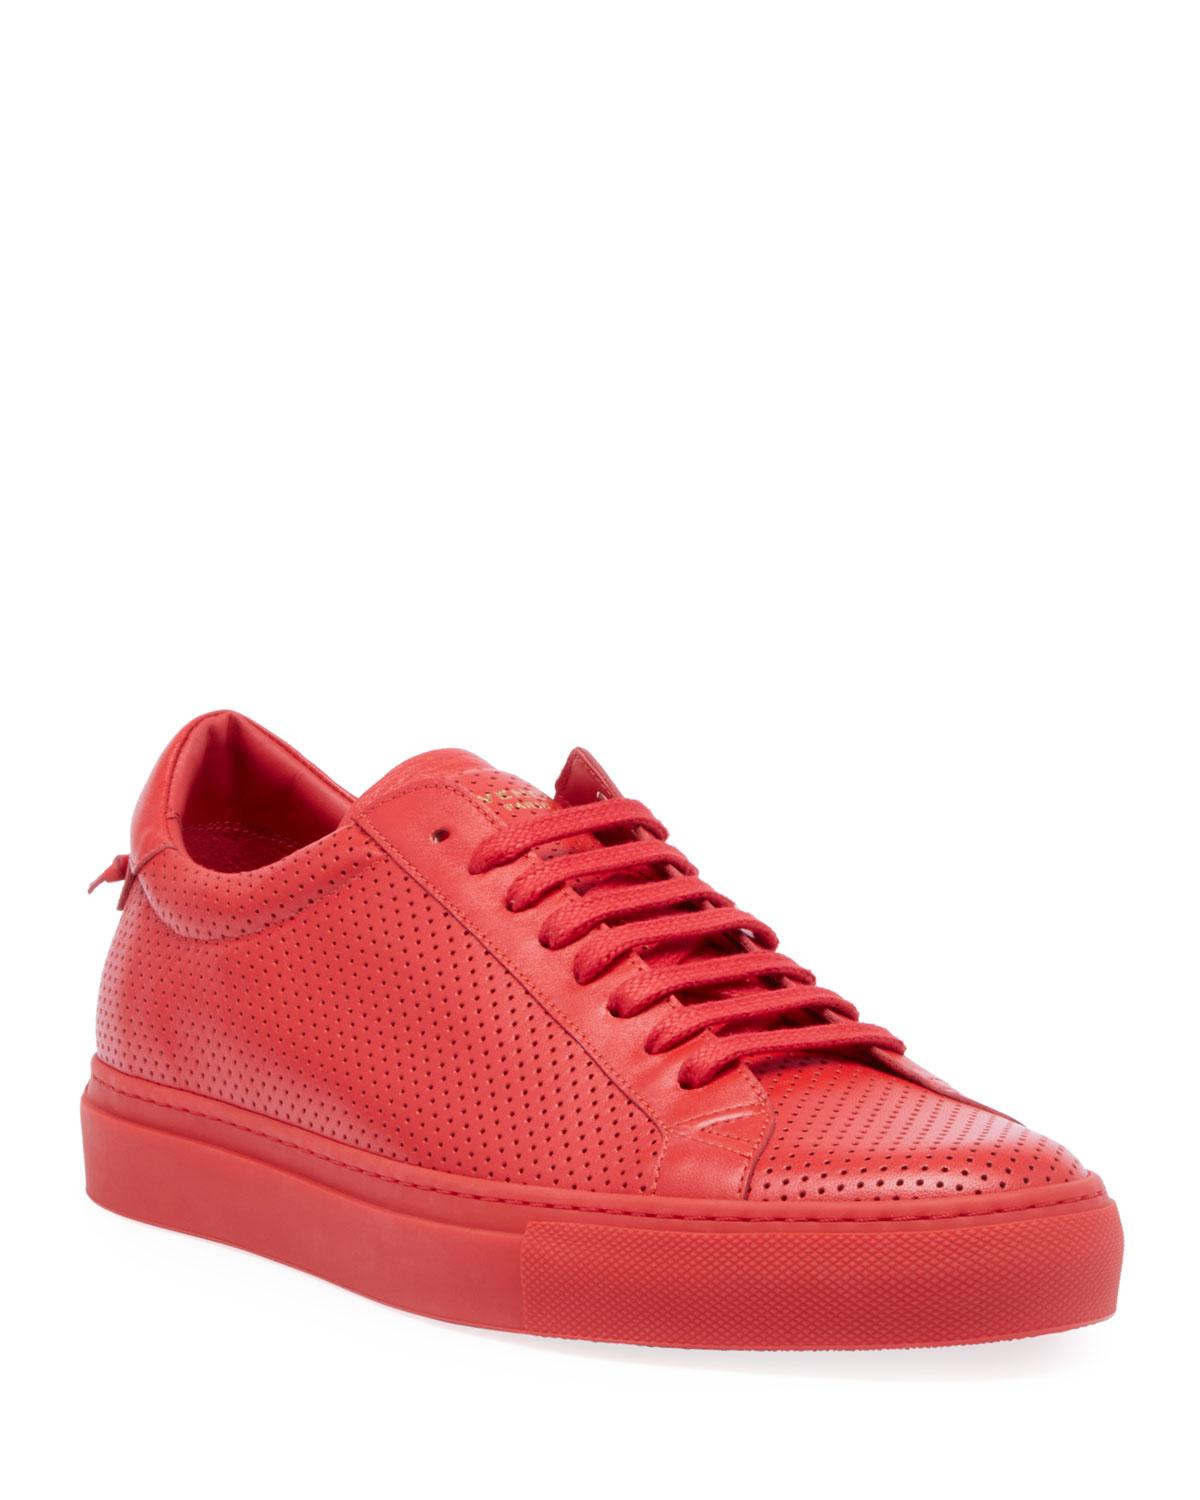 Lyst - Givenchy Men's Urban Street Perforated Leather Low-top Sneakers ...